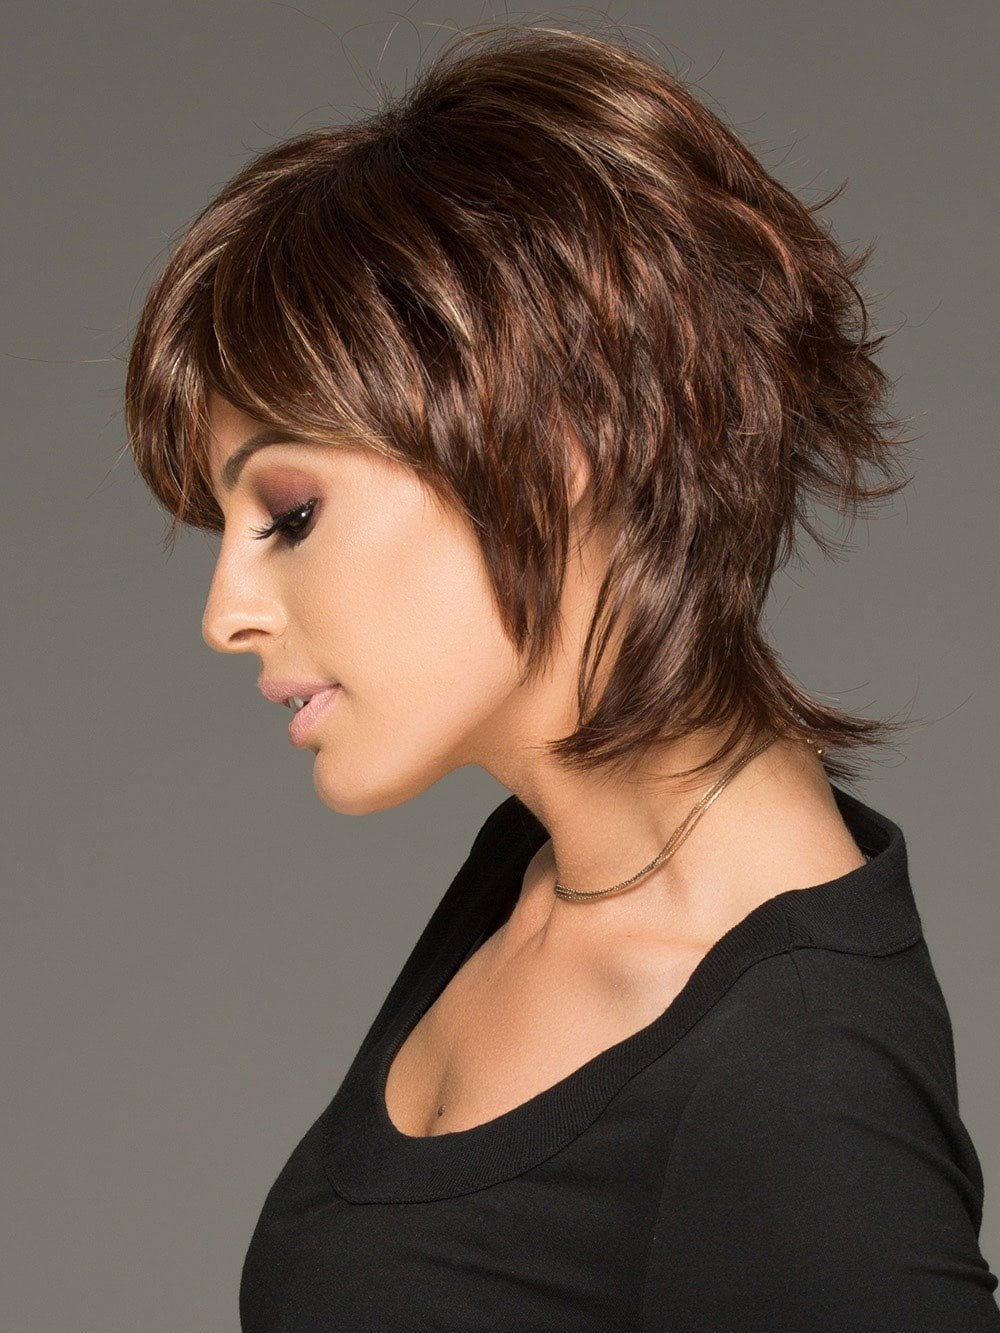 his cutting edge hair style has gorgeous layers and a long wispy nape for texture & easy styling